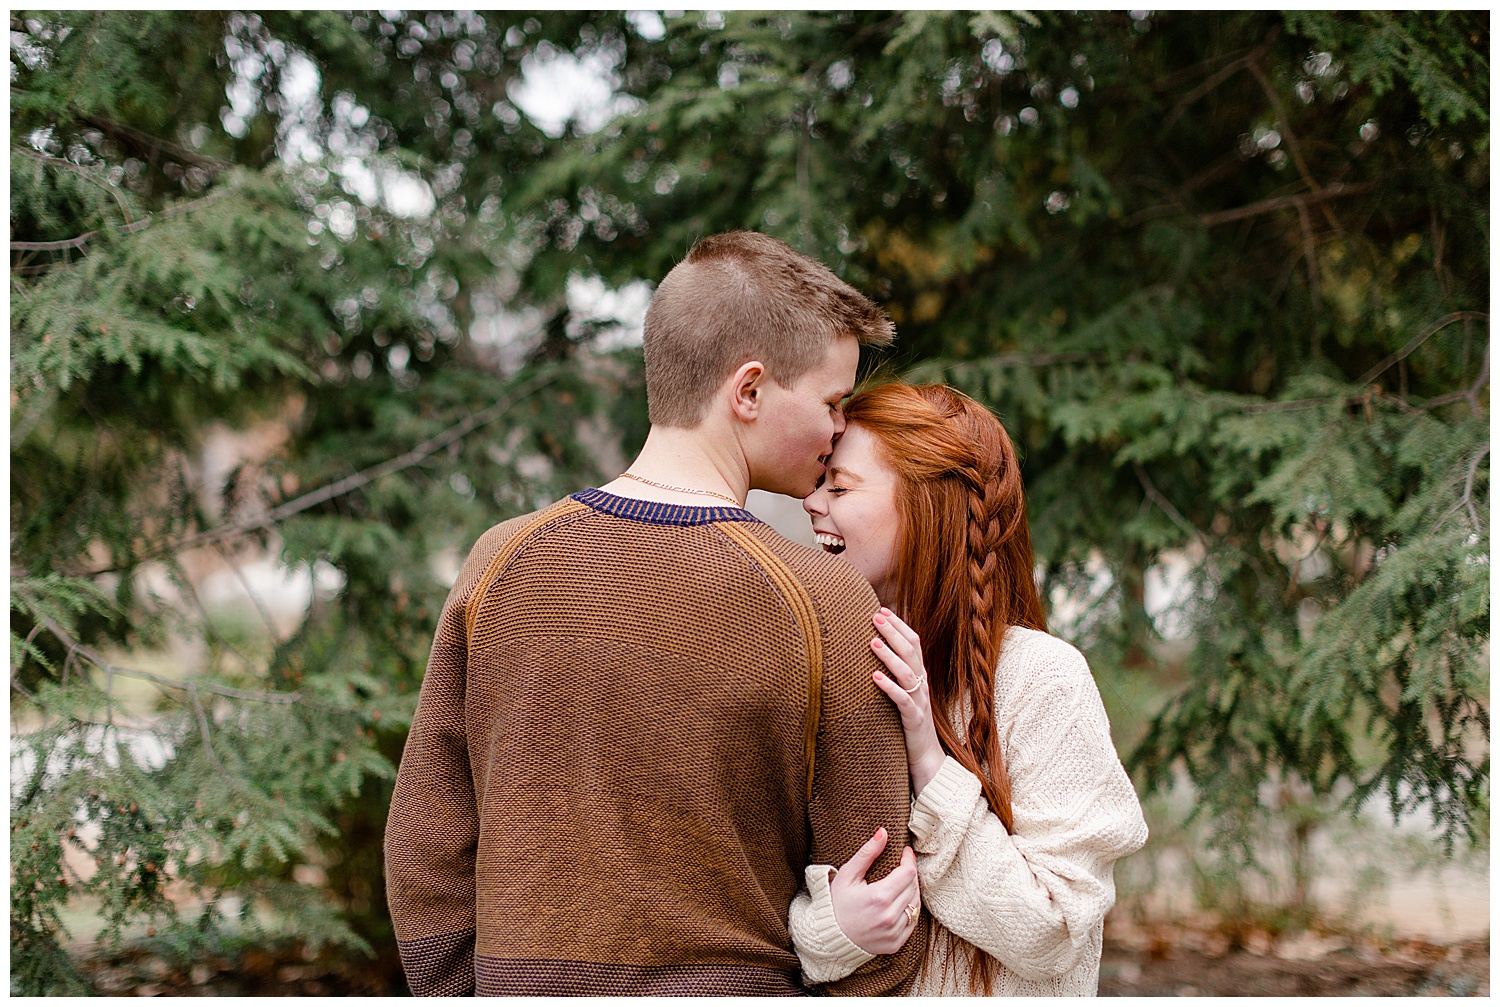 Grant kissing Ashley on the forehead in the evergreen trees during their engagement session at woodward park.